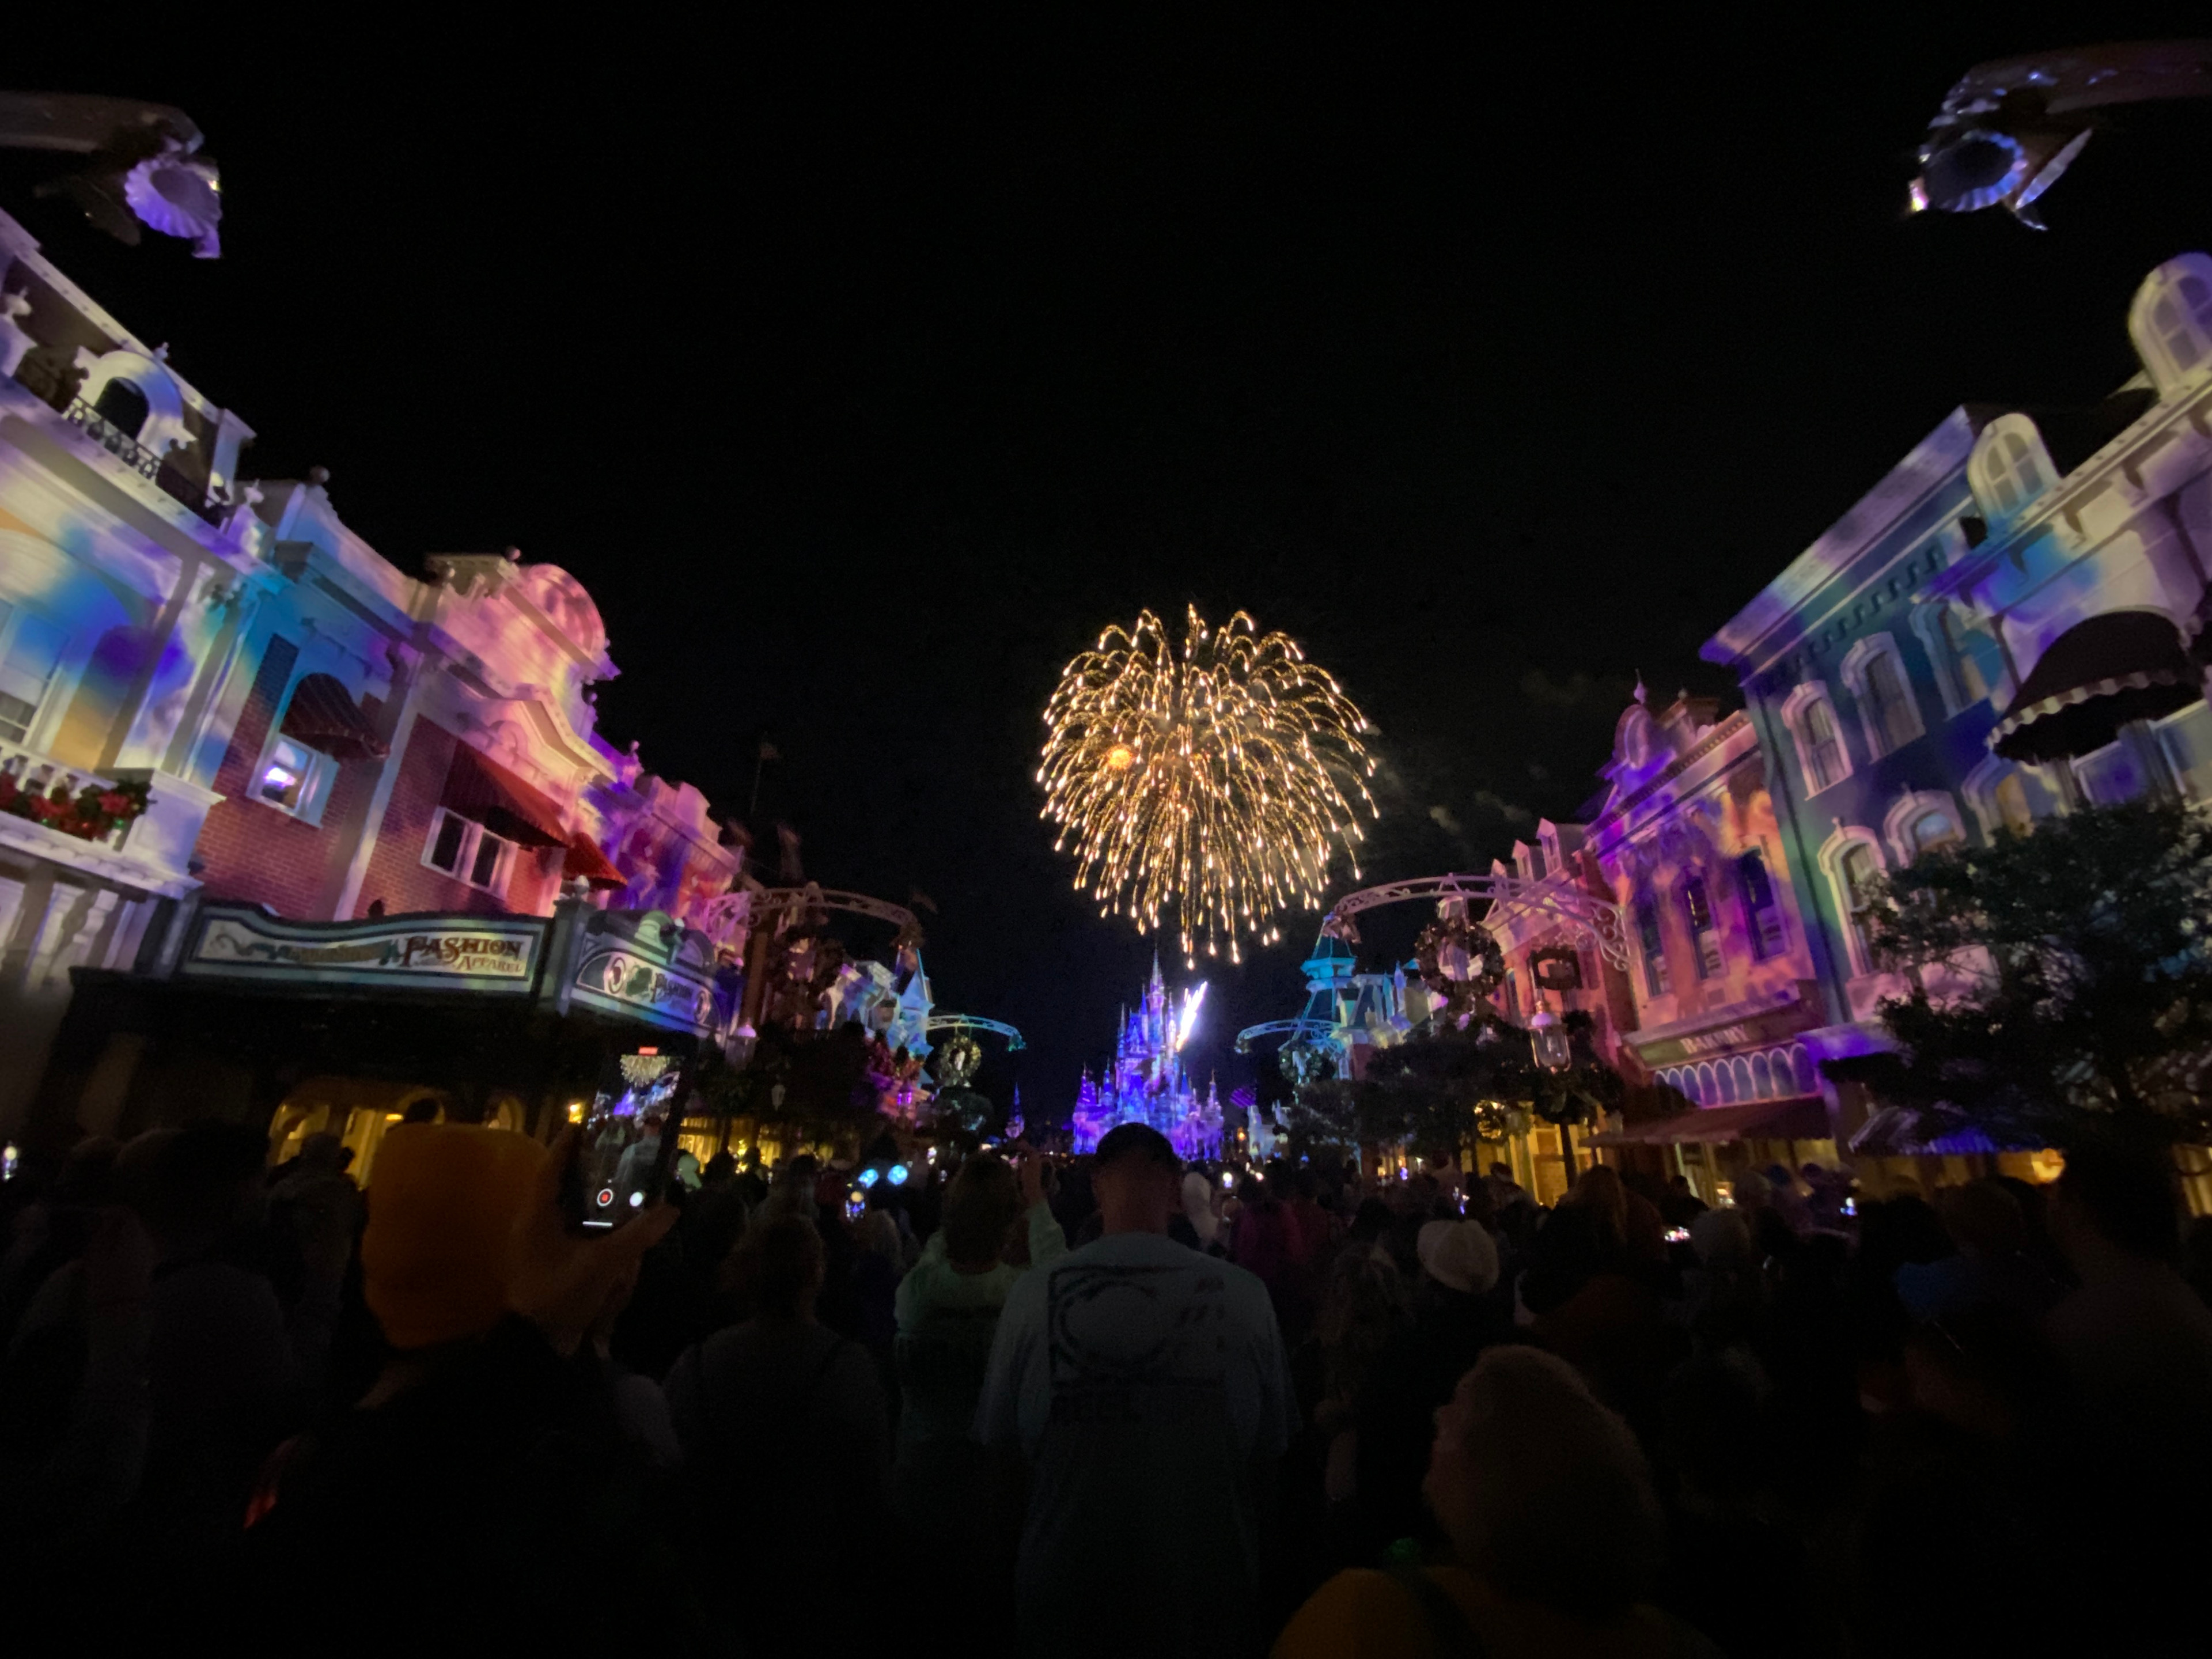 View of the sequence from Main Street USA